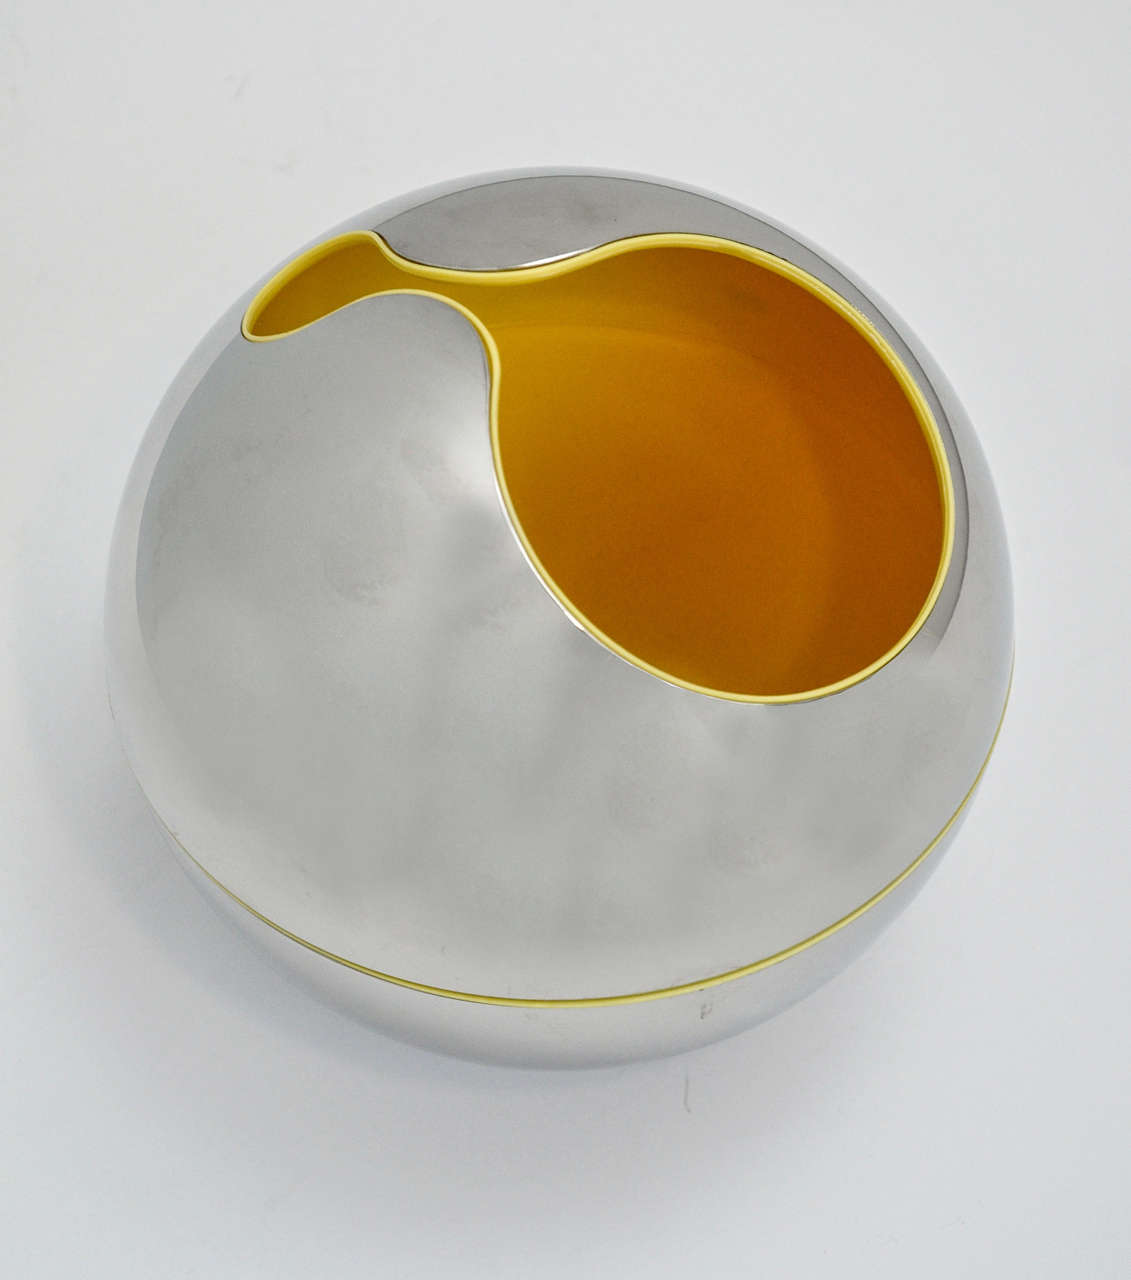 Stainless Steel Gio Pomodoro Sphere or Holder for Alessi d'Apres, 1972